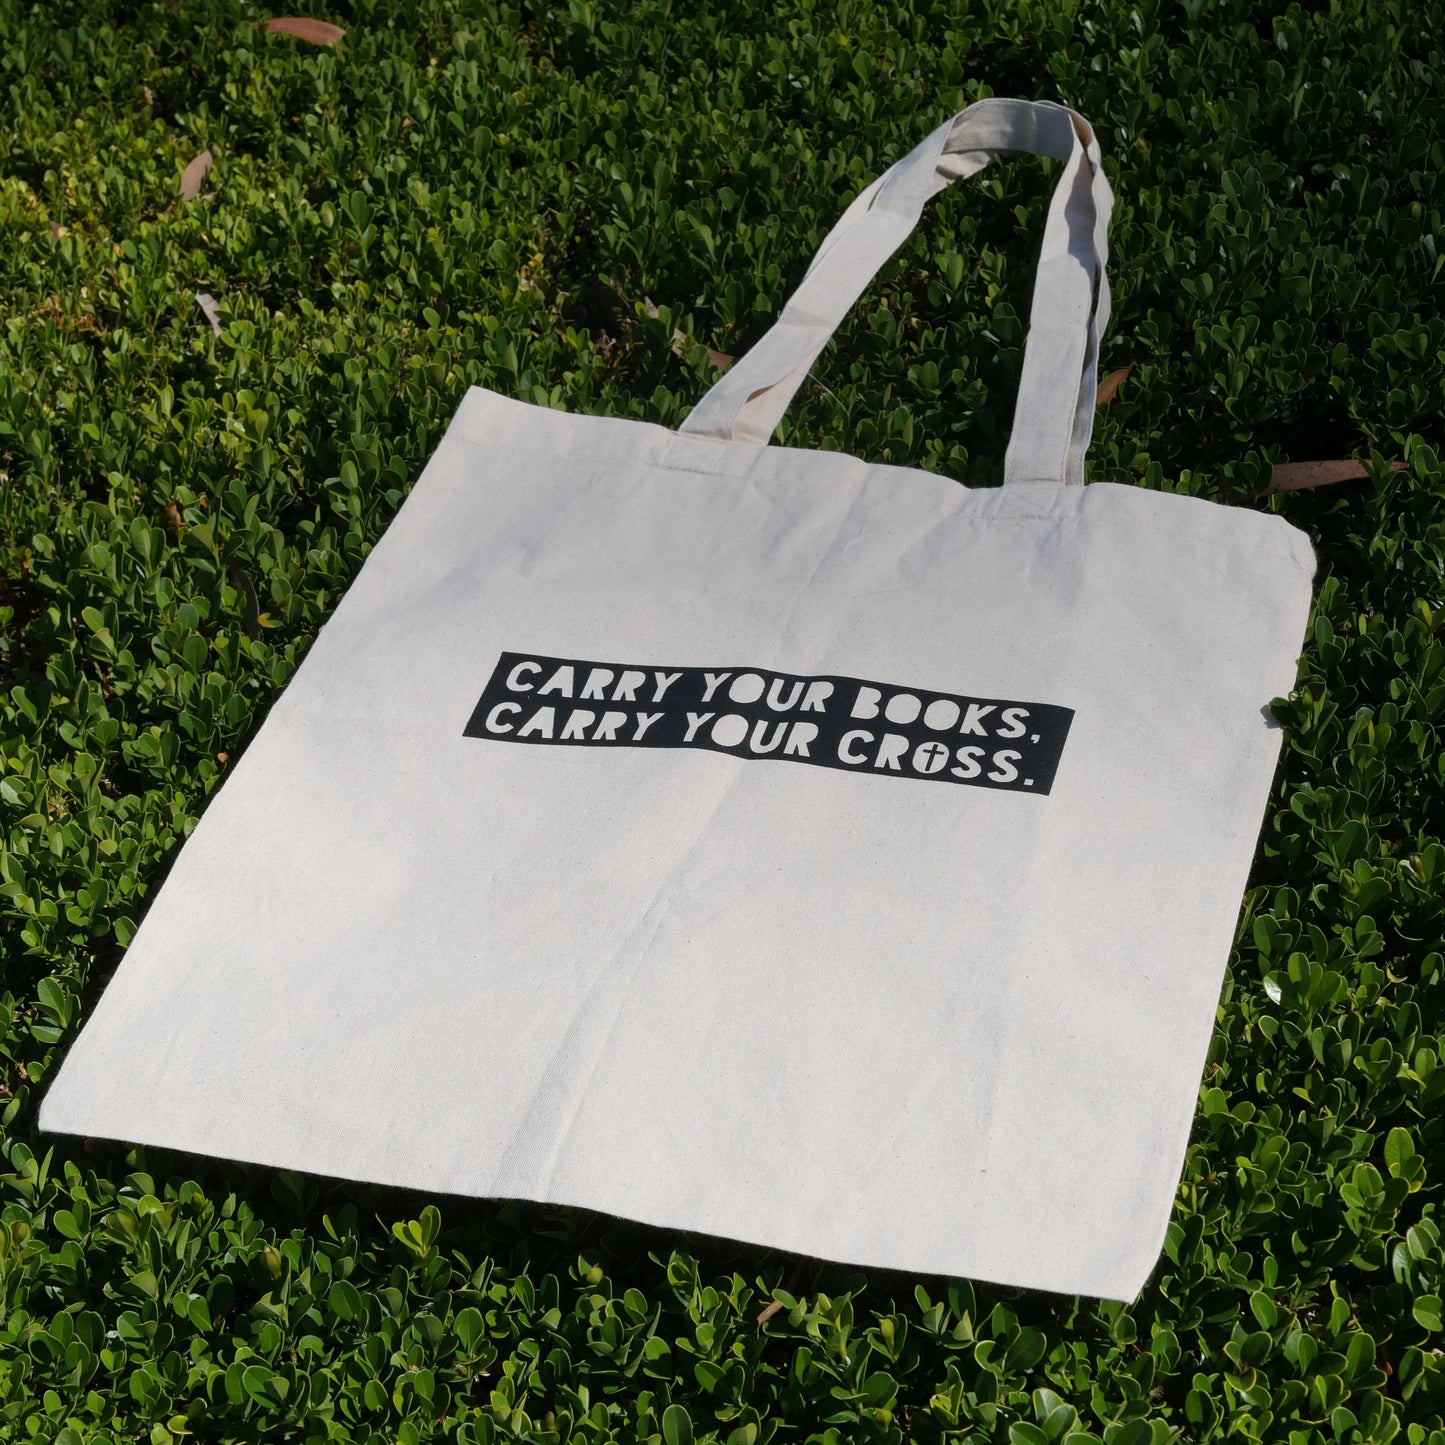 CARRY YOUR BOOKS CARRY YOUR CROSS TOTE